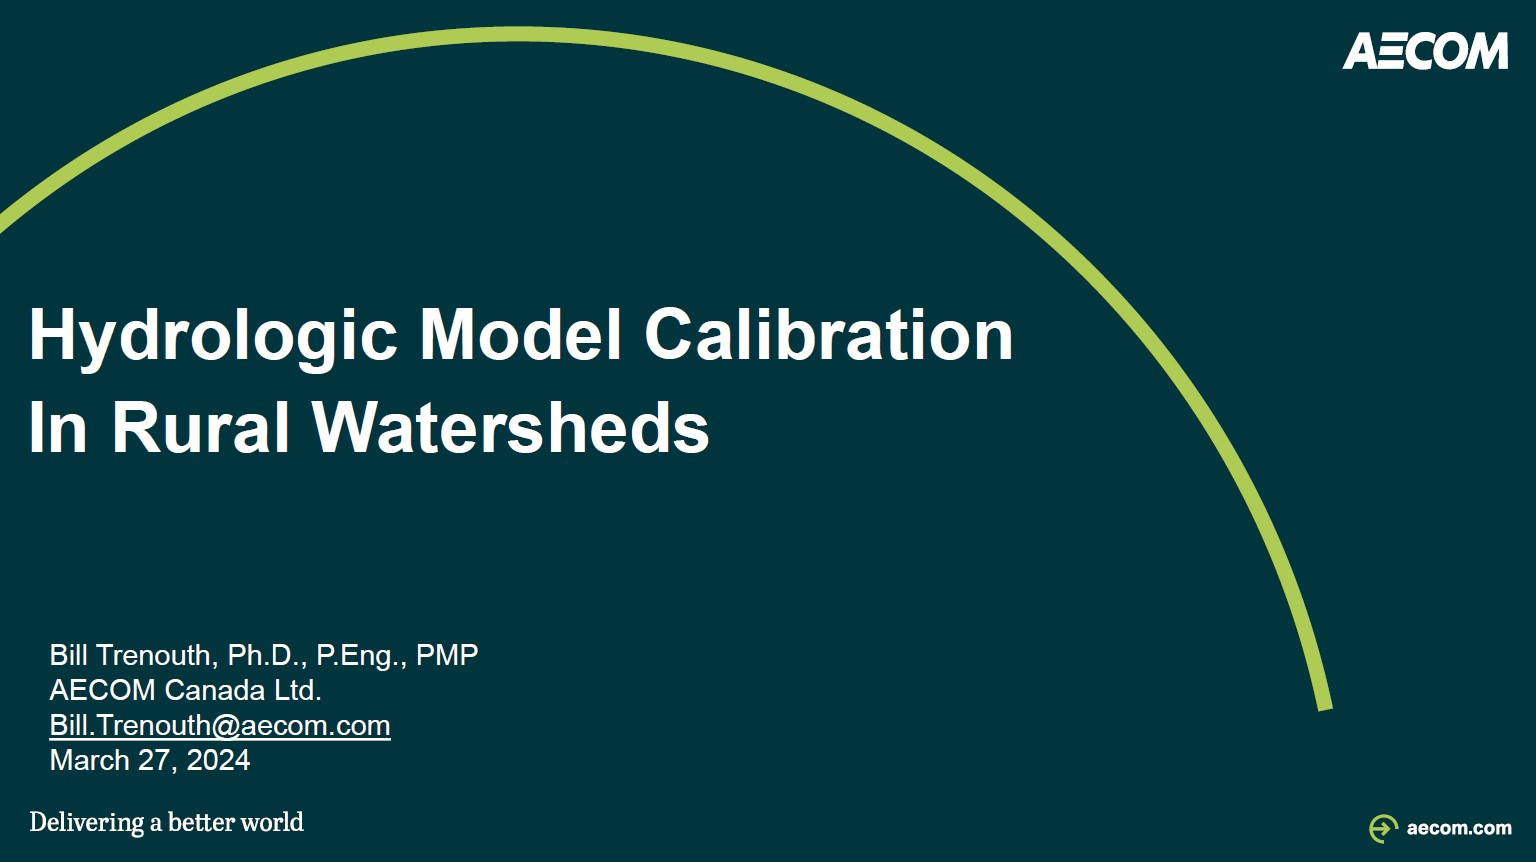 Hydrologic Model Calibration in Rural Watersheds - presentation by Bill Trenouth